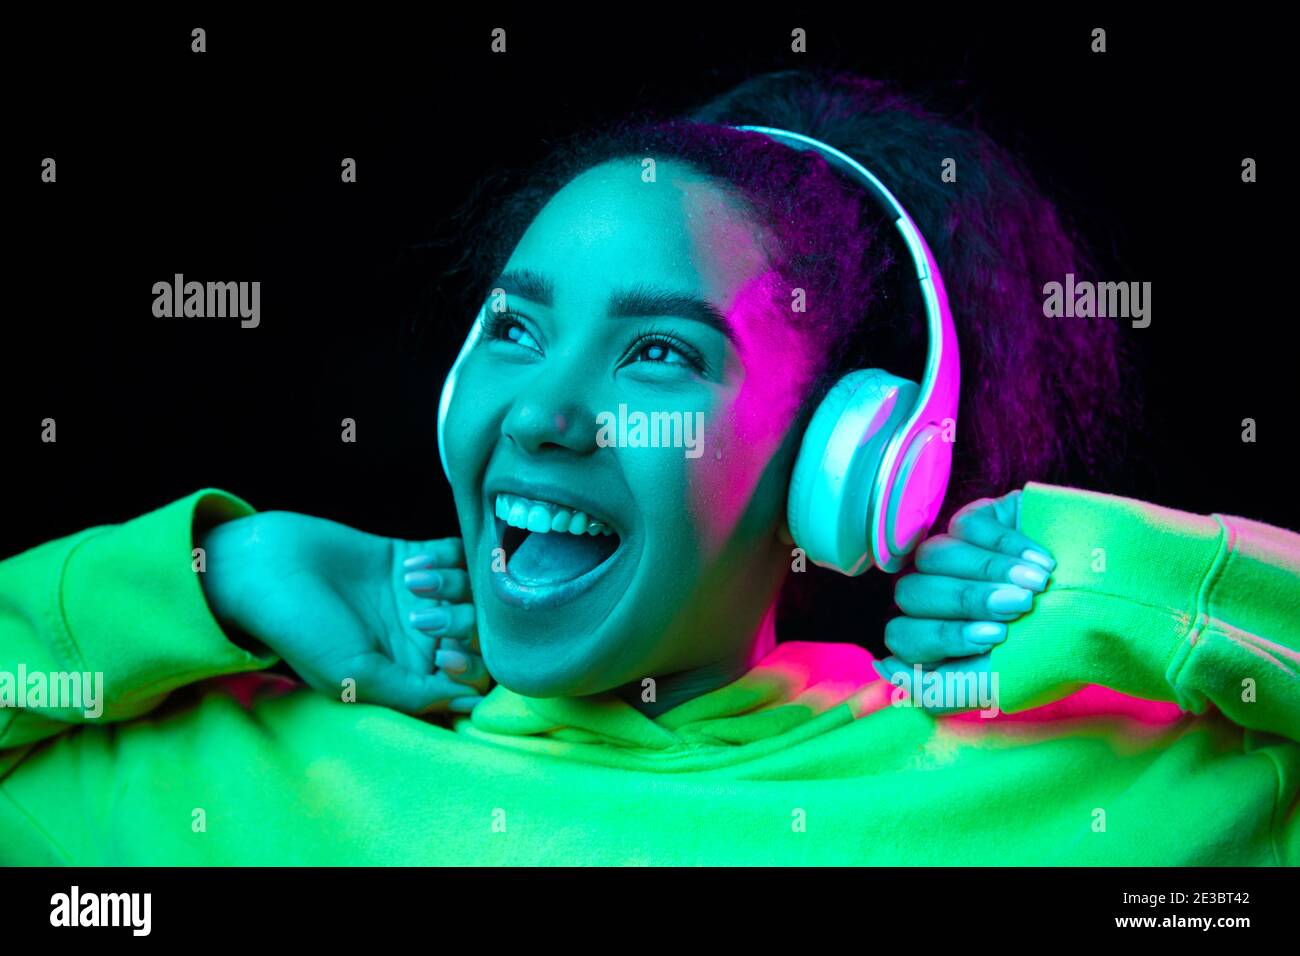 Laughting. African-american woman isolated on dark studio background in multicolored neon. Listening to music with headphones. Concept of human emotions, facial expression, sales, ad, fashion. Stock Photo